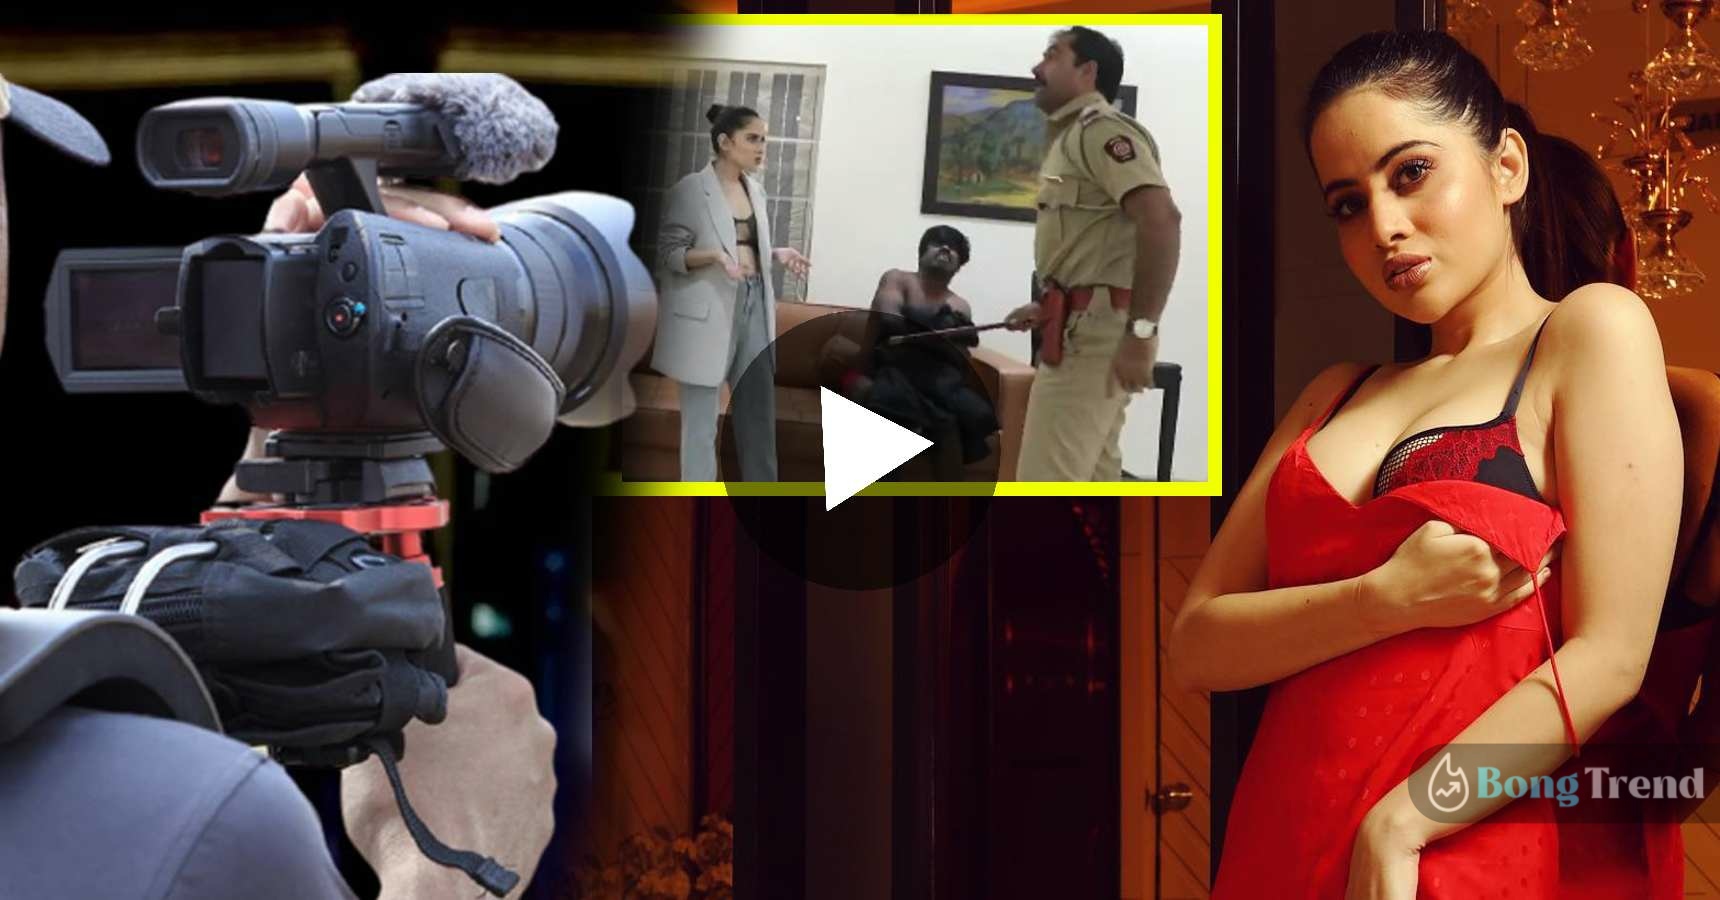 Uefi Javed Caught red handed by police while shooting for film